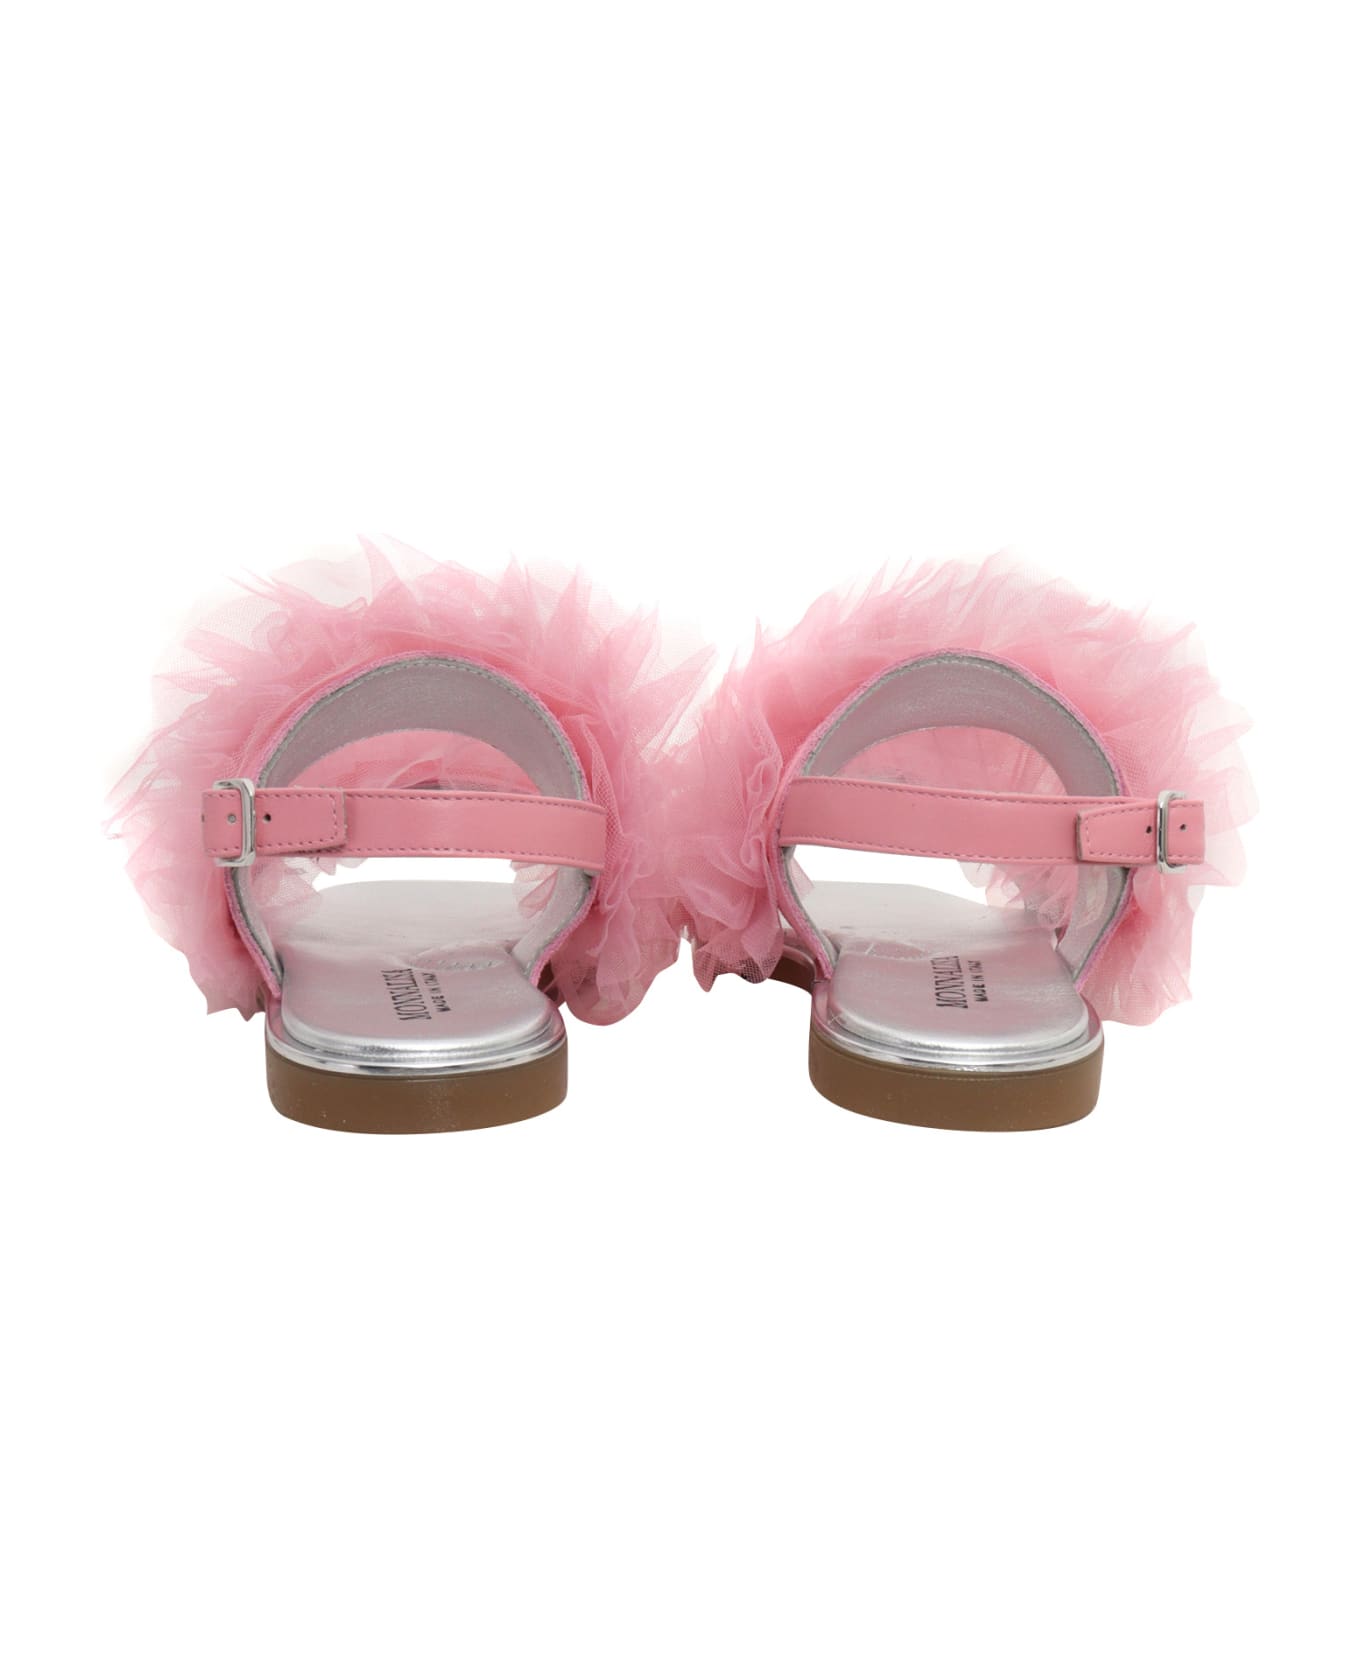 Monnalisa Girl's Sandals With Tulle - PINK シューズ